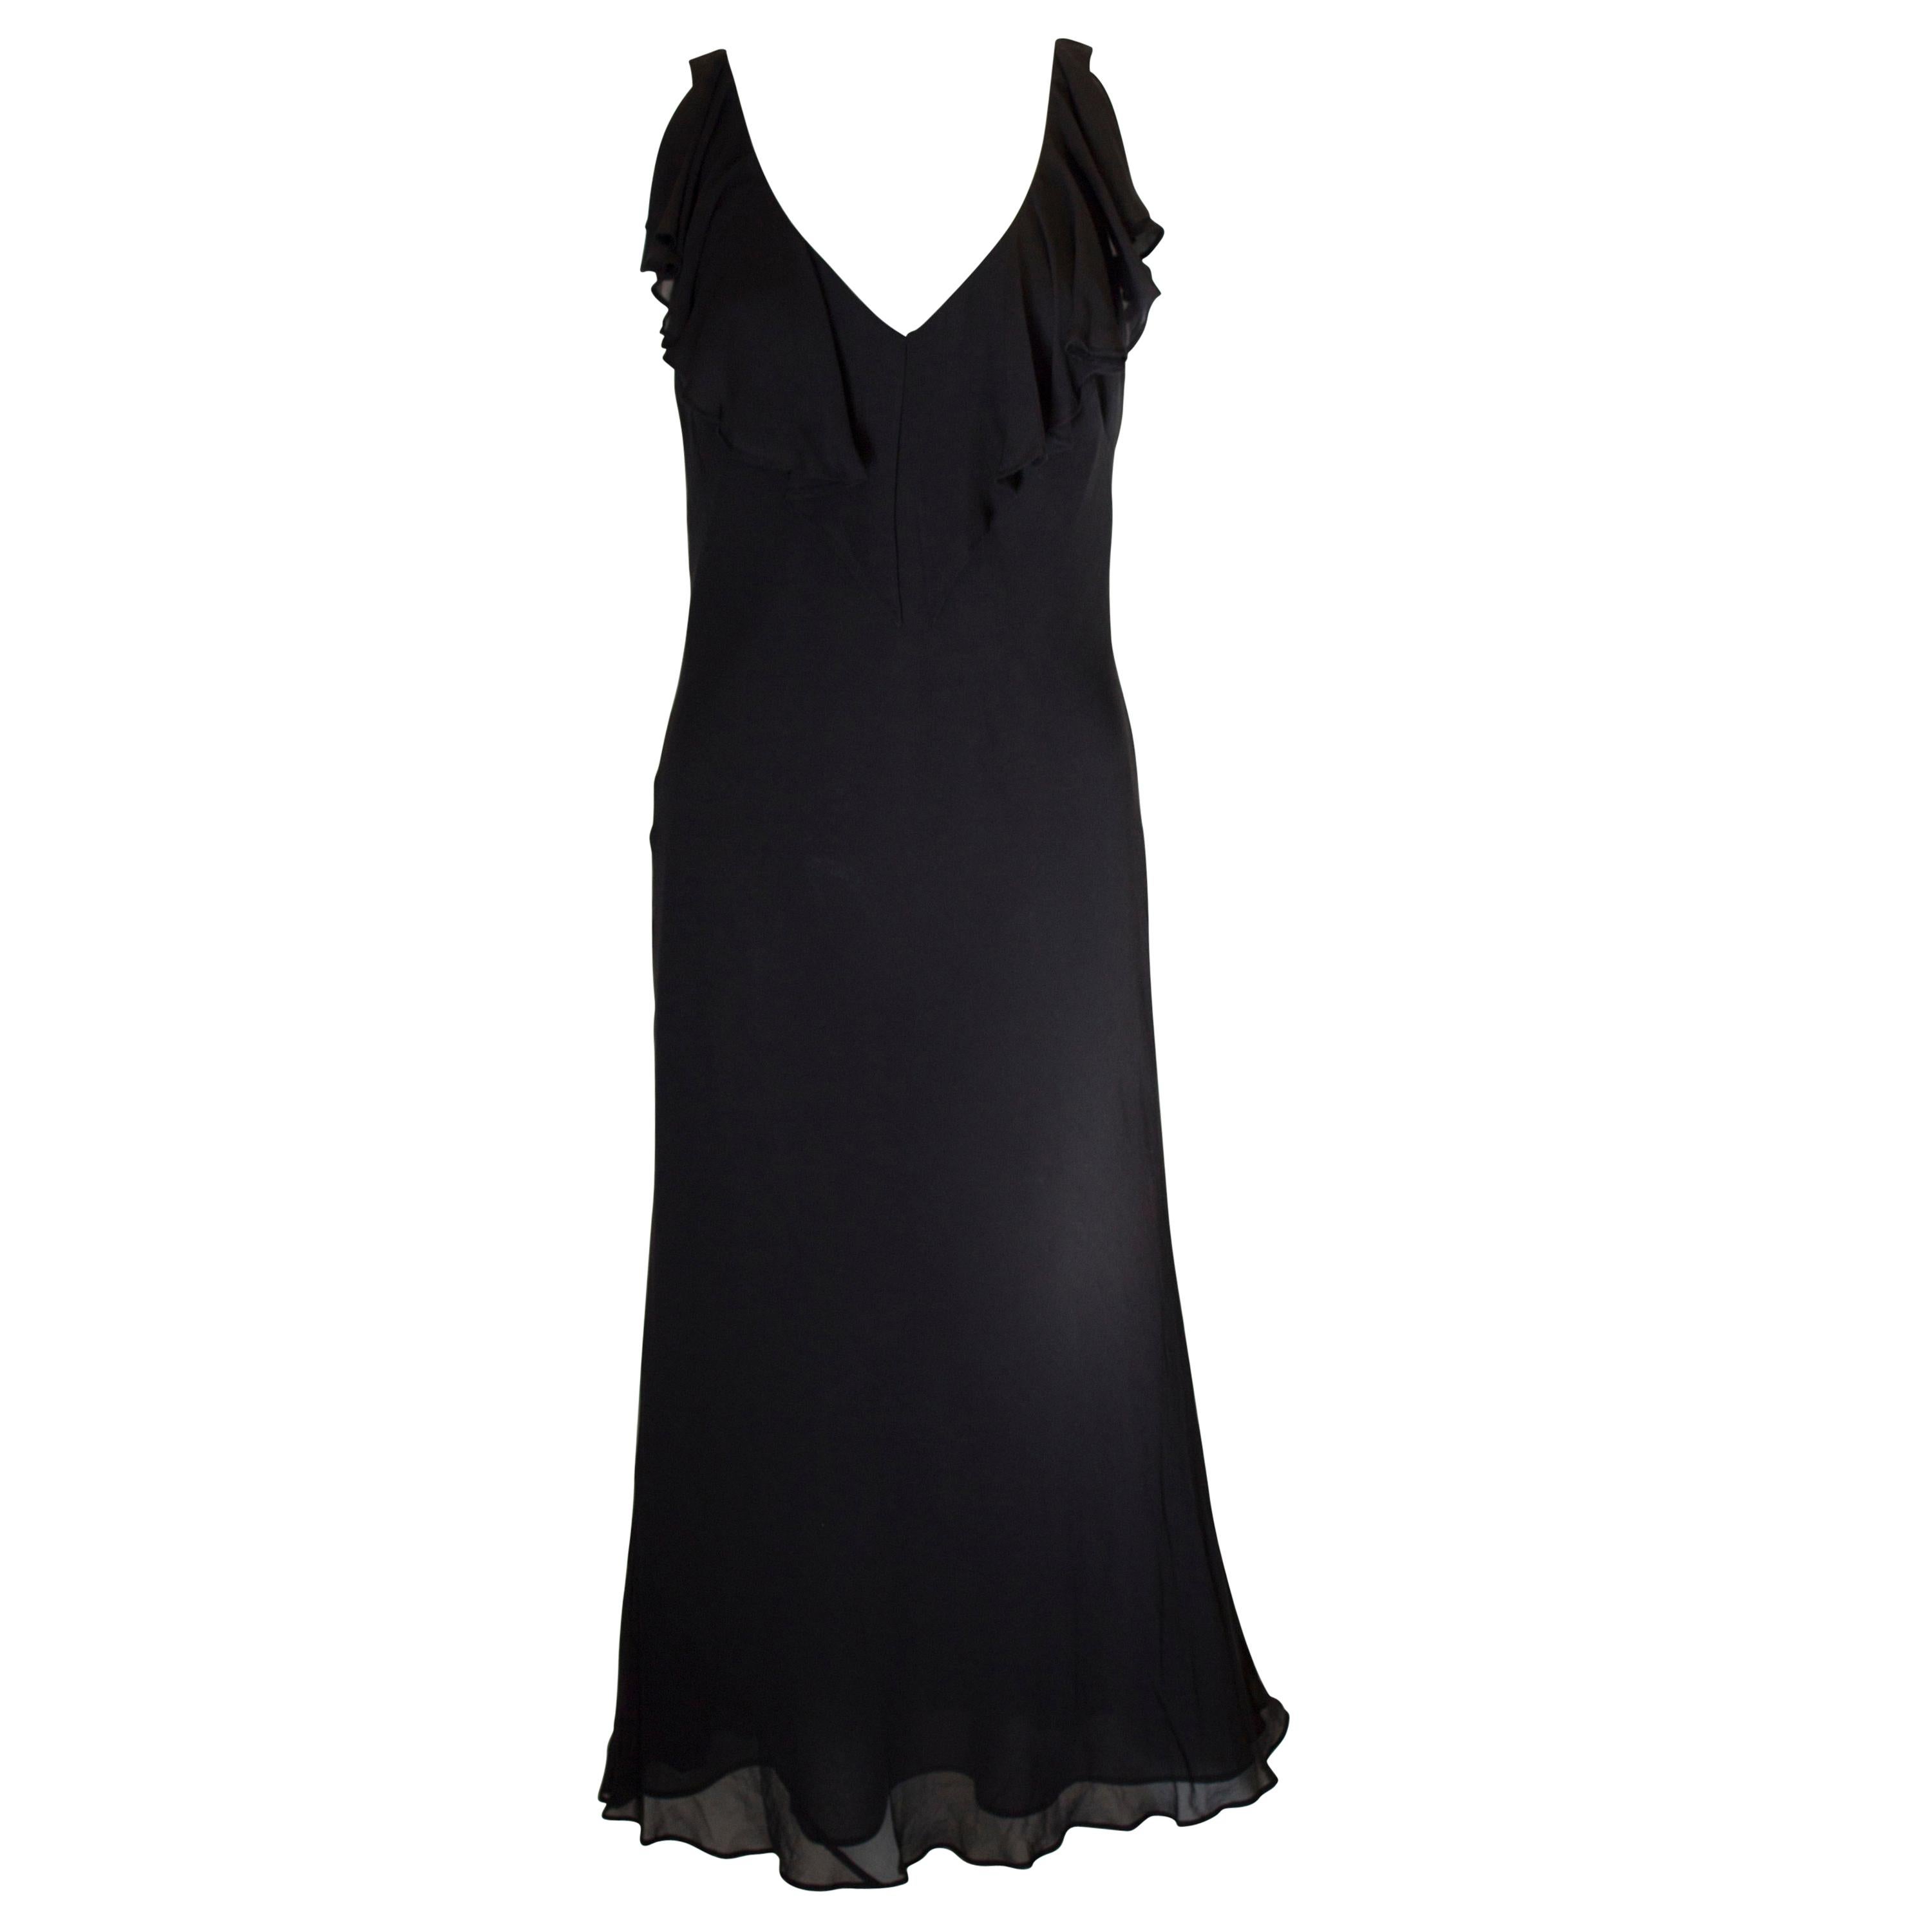 Vintage Slip Dress with Ruffle at Neckline For Sale